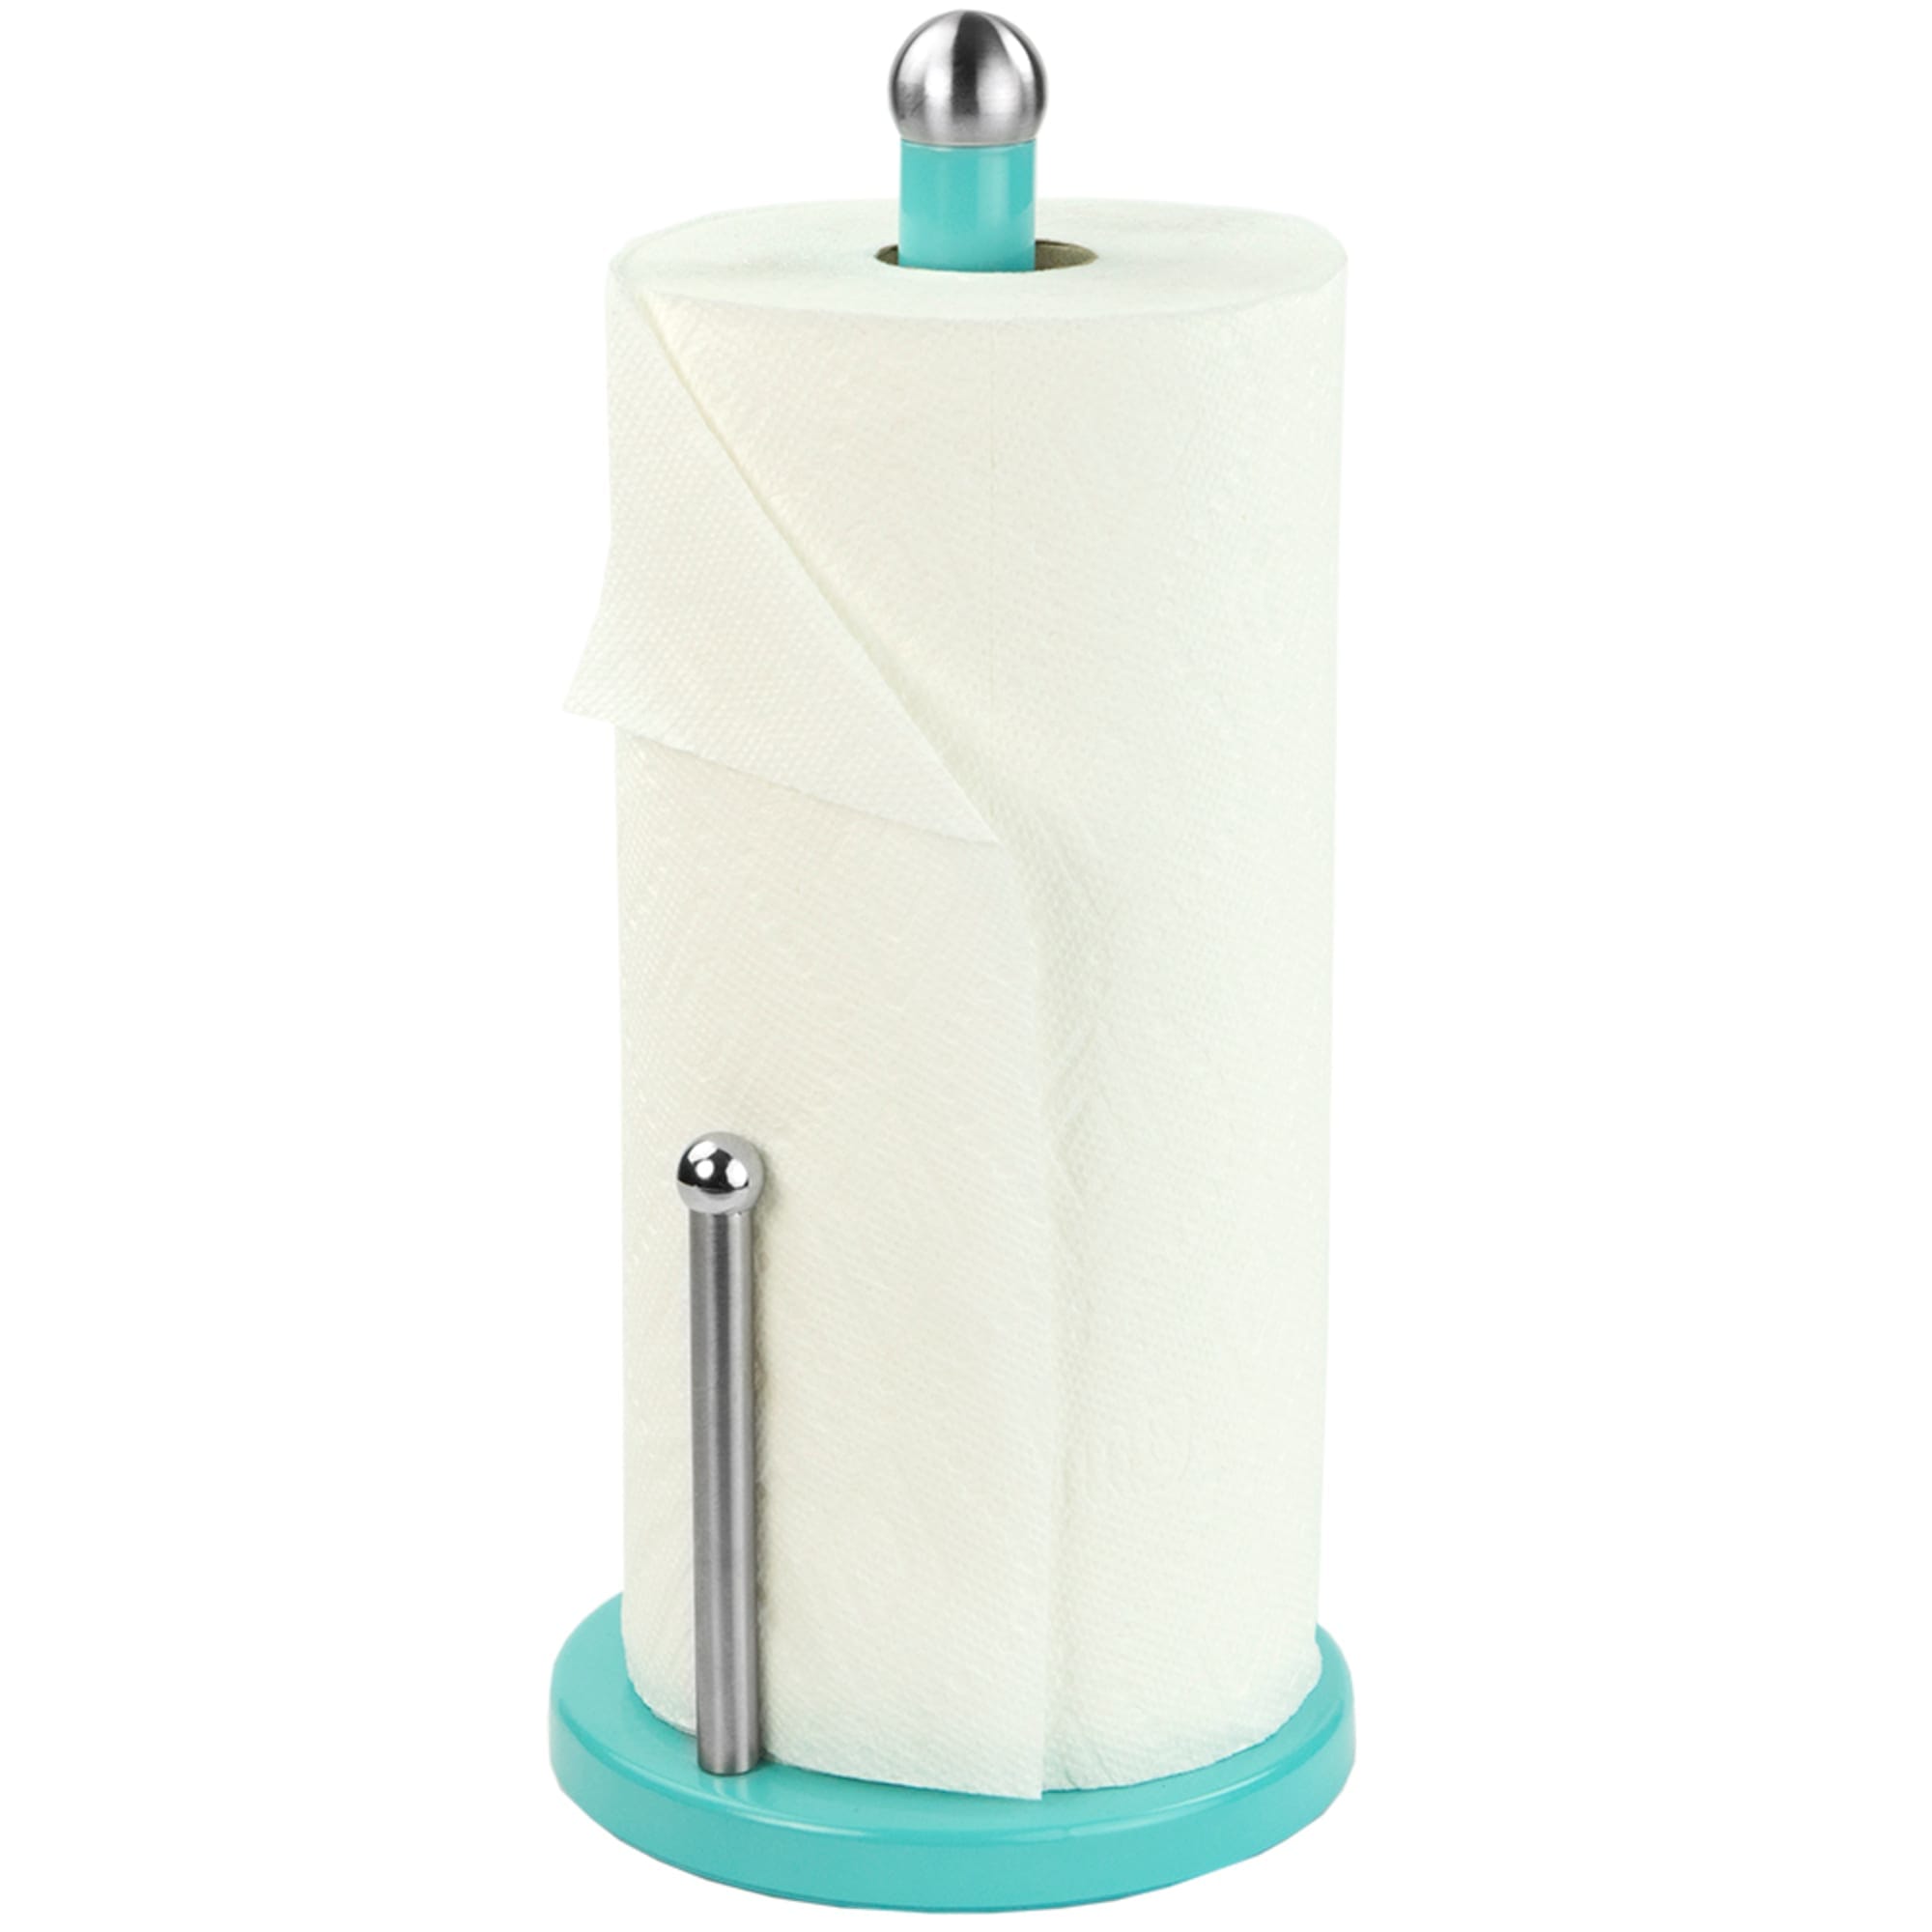 Home Basics Powder Coated Steel Paper Towel Holder, Turquoise $5.00 EACH, CASE PACK OF 12